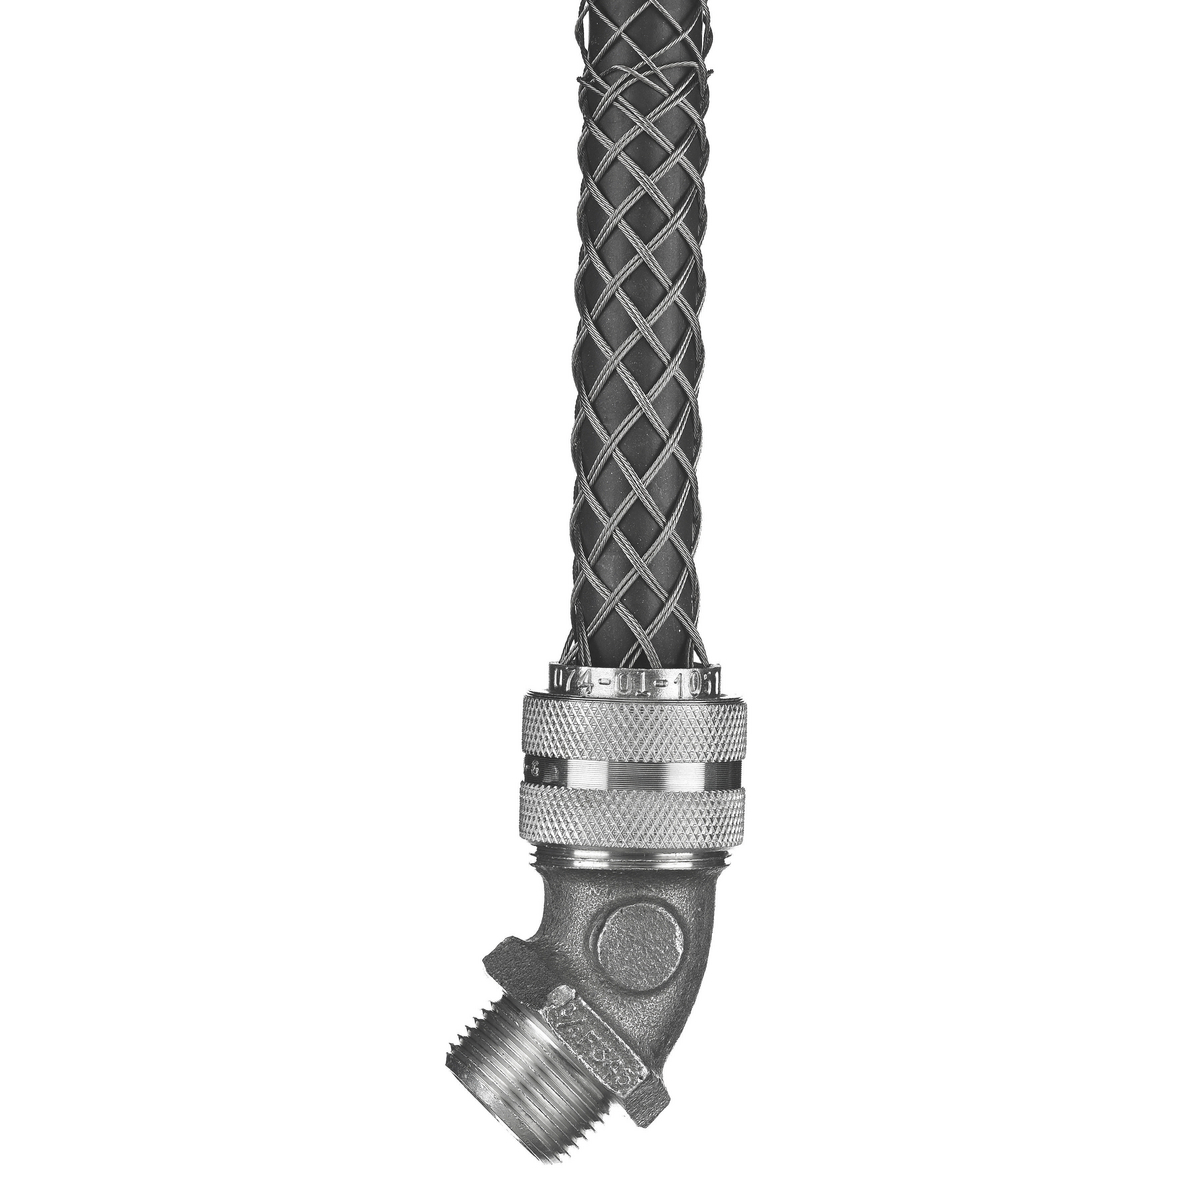 Deluxe Cord Grip, 45 Degree Male, .500-.625, 1/2 With Mesh, DC50412